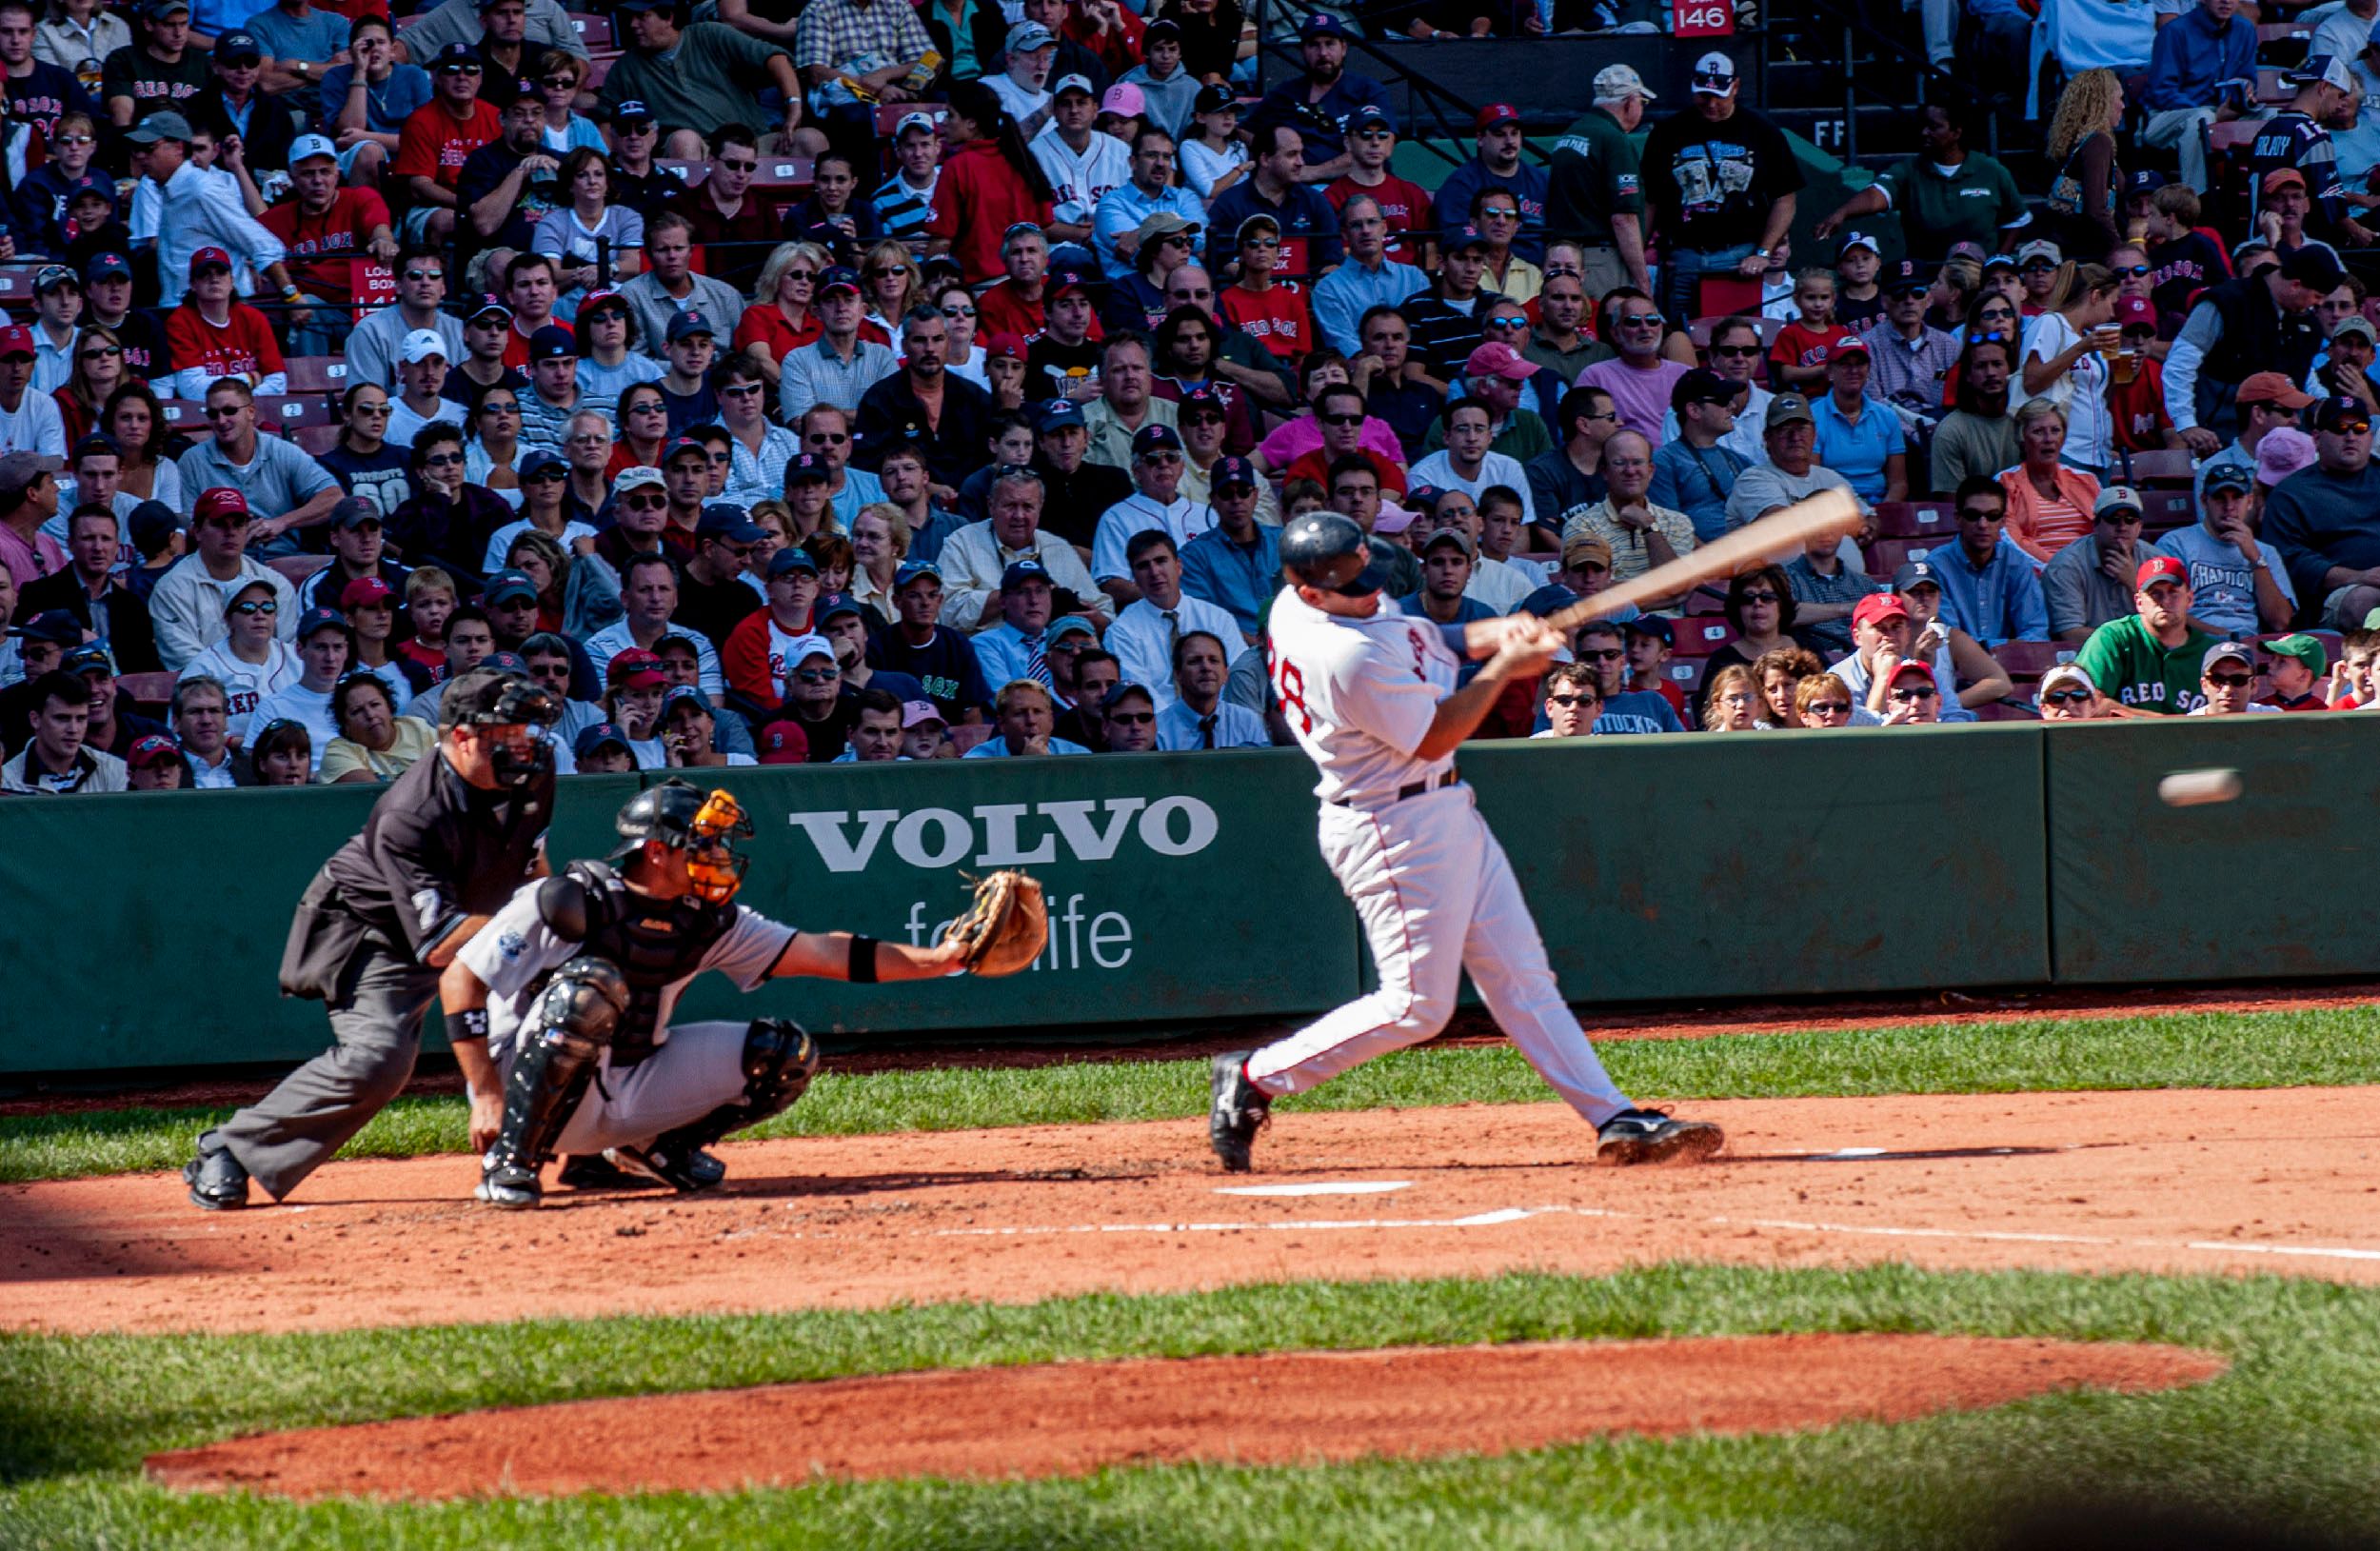 Boston Red Sox Game at Fenway Park